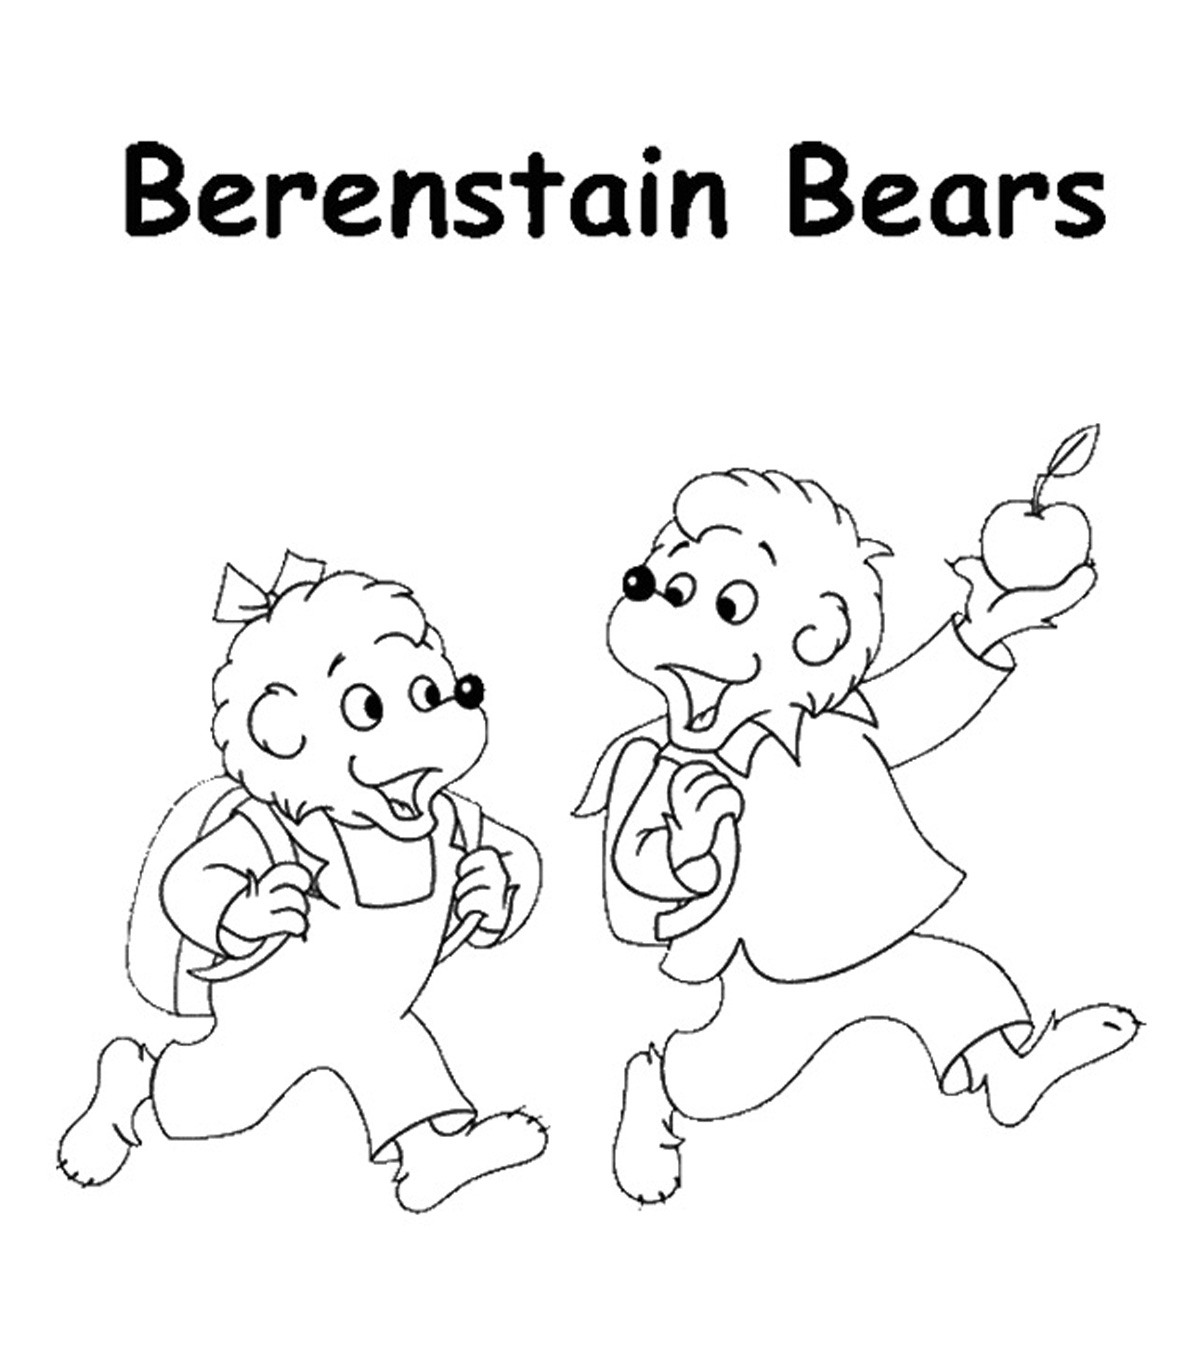 Berenstain Bears Coloring Pages Top 25 Free Printable Berenstain Bears Coloring Pages Online